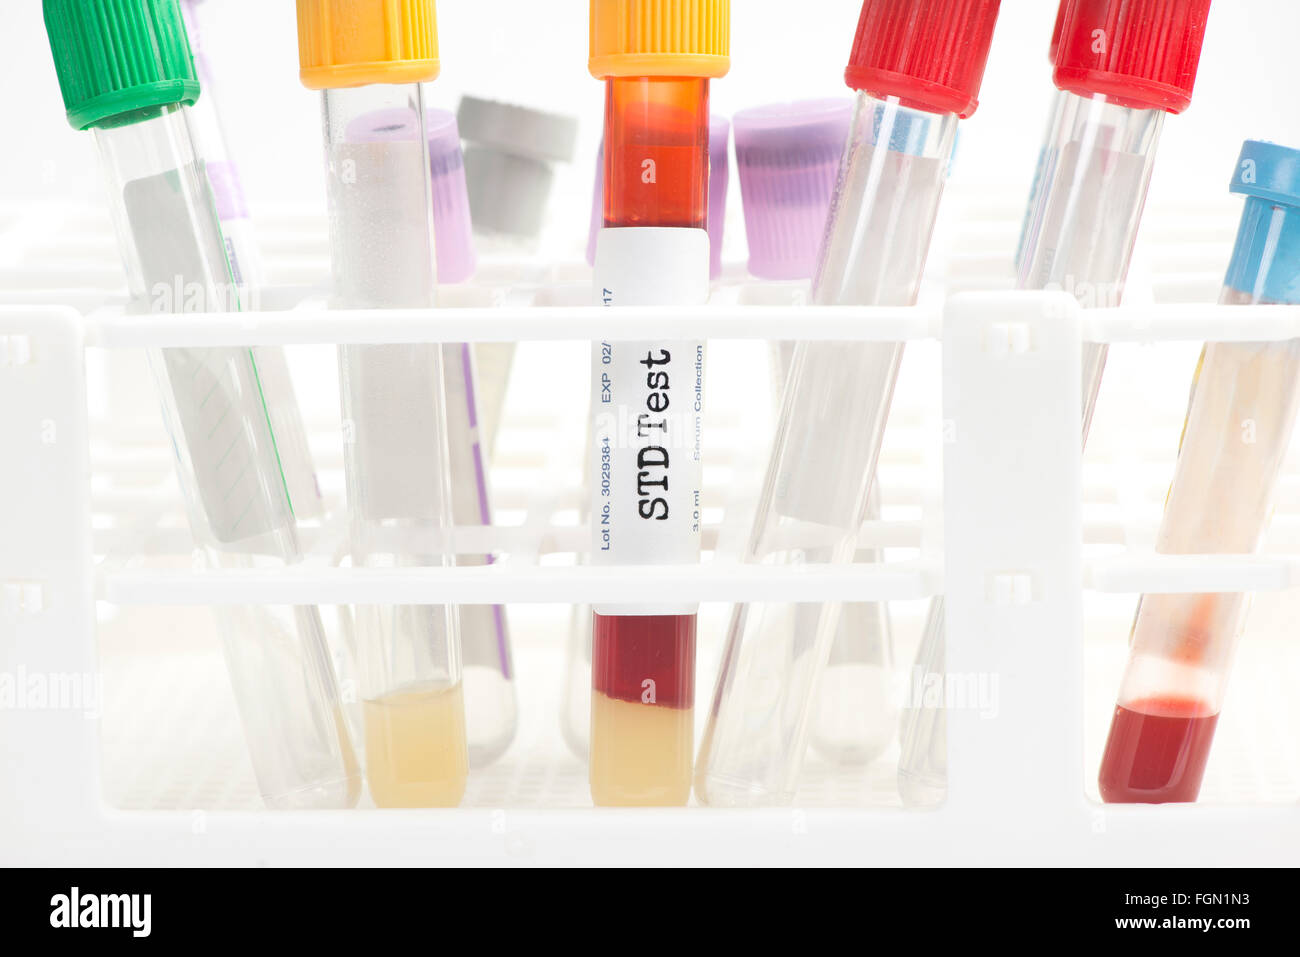 STD blood analysis collection tube with test tube rack.  Labels and document are fictitious and created by the photographer. Stock Photo